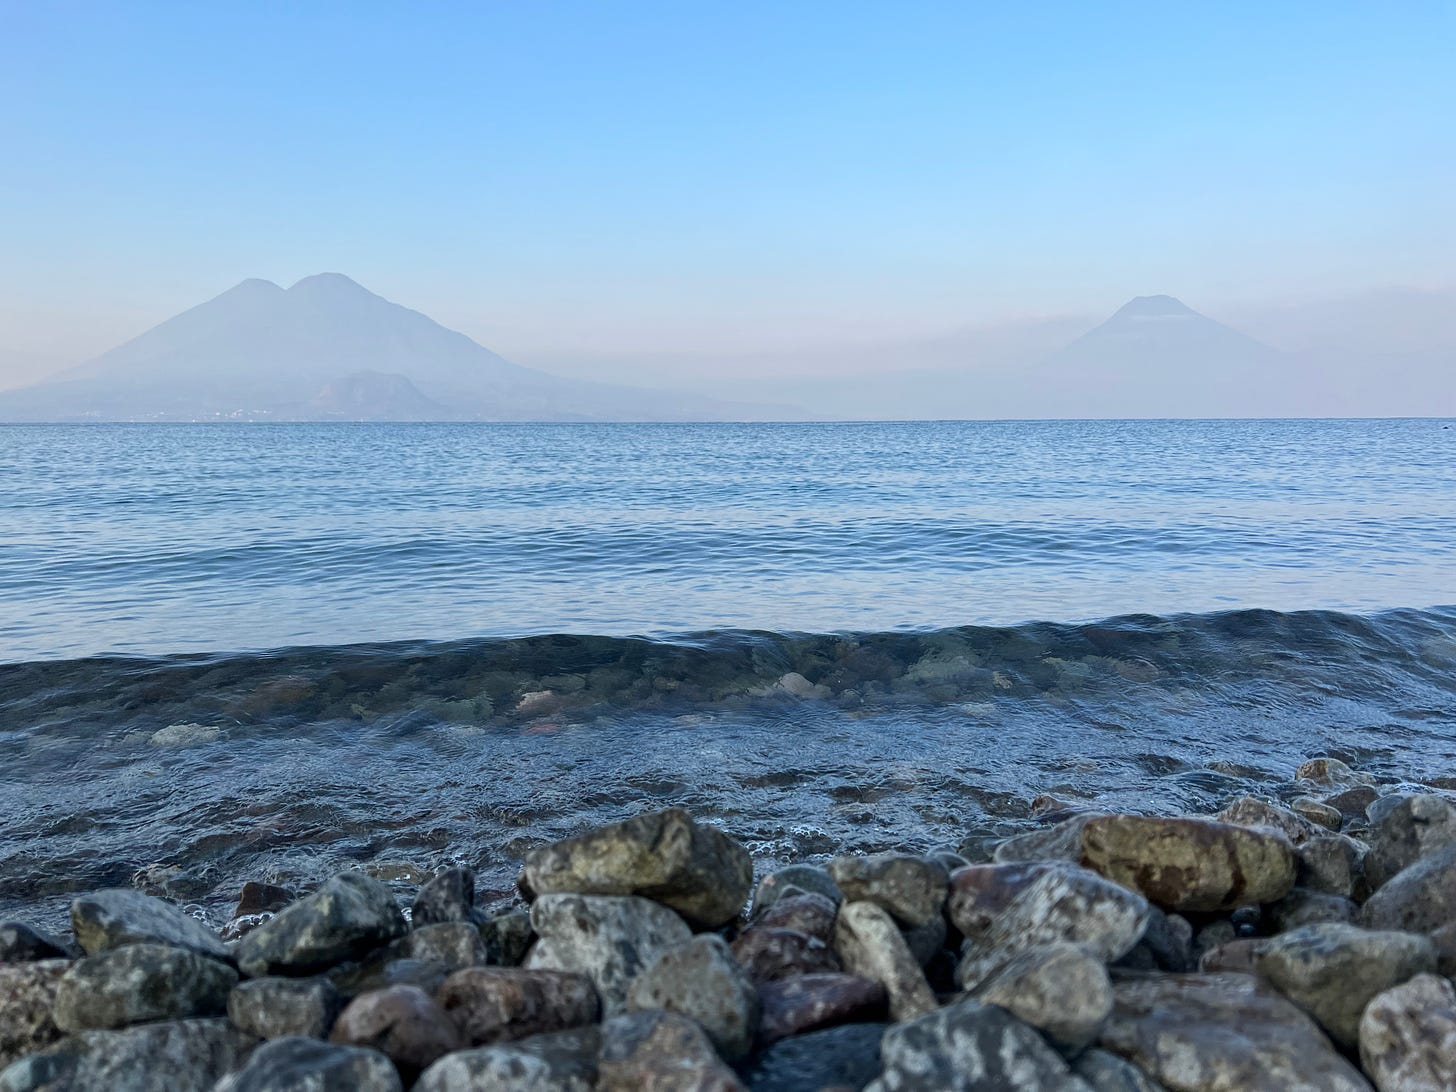 a lake in the morning with two volcanos shrouded by haze in the background set against a blue sky